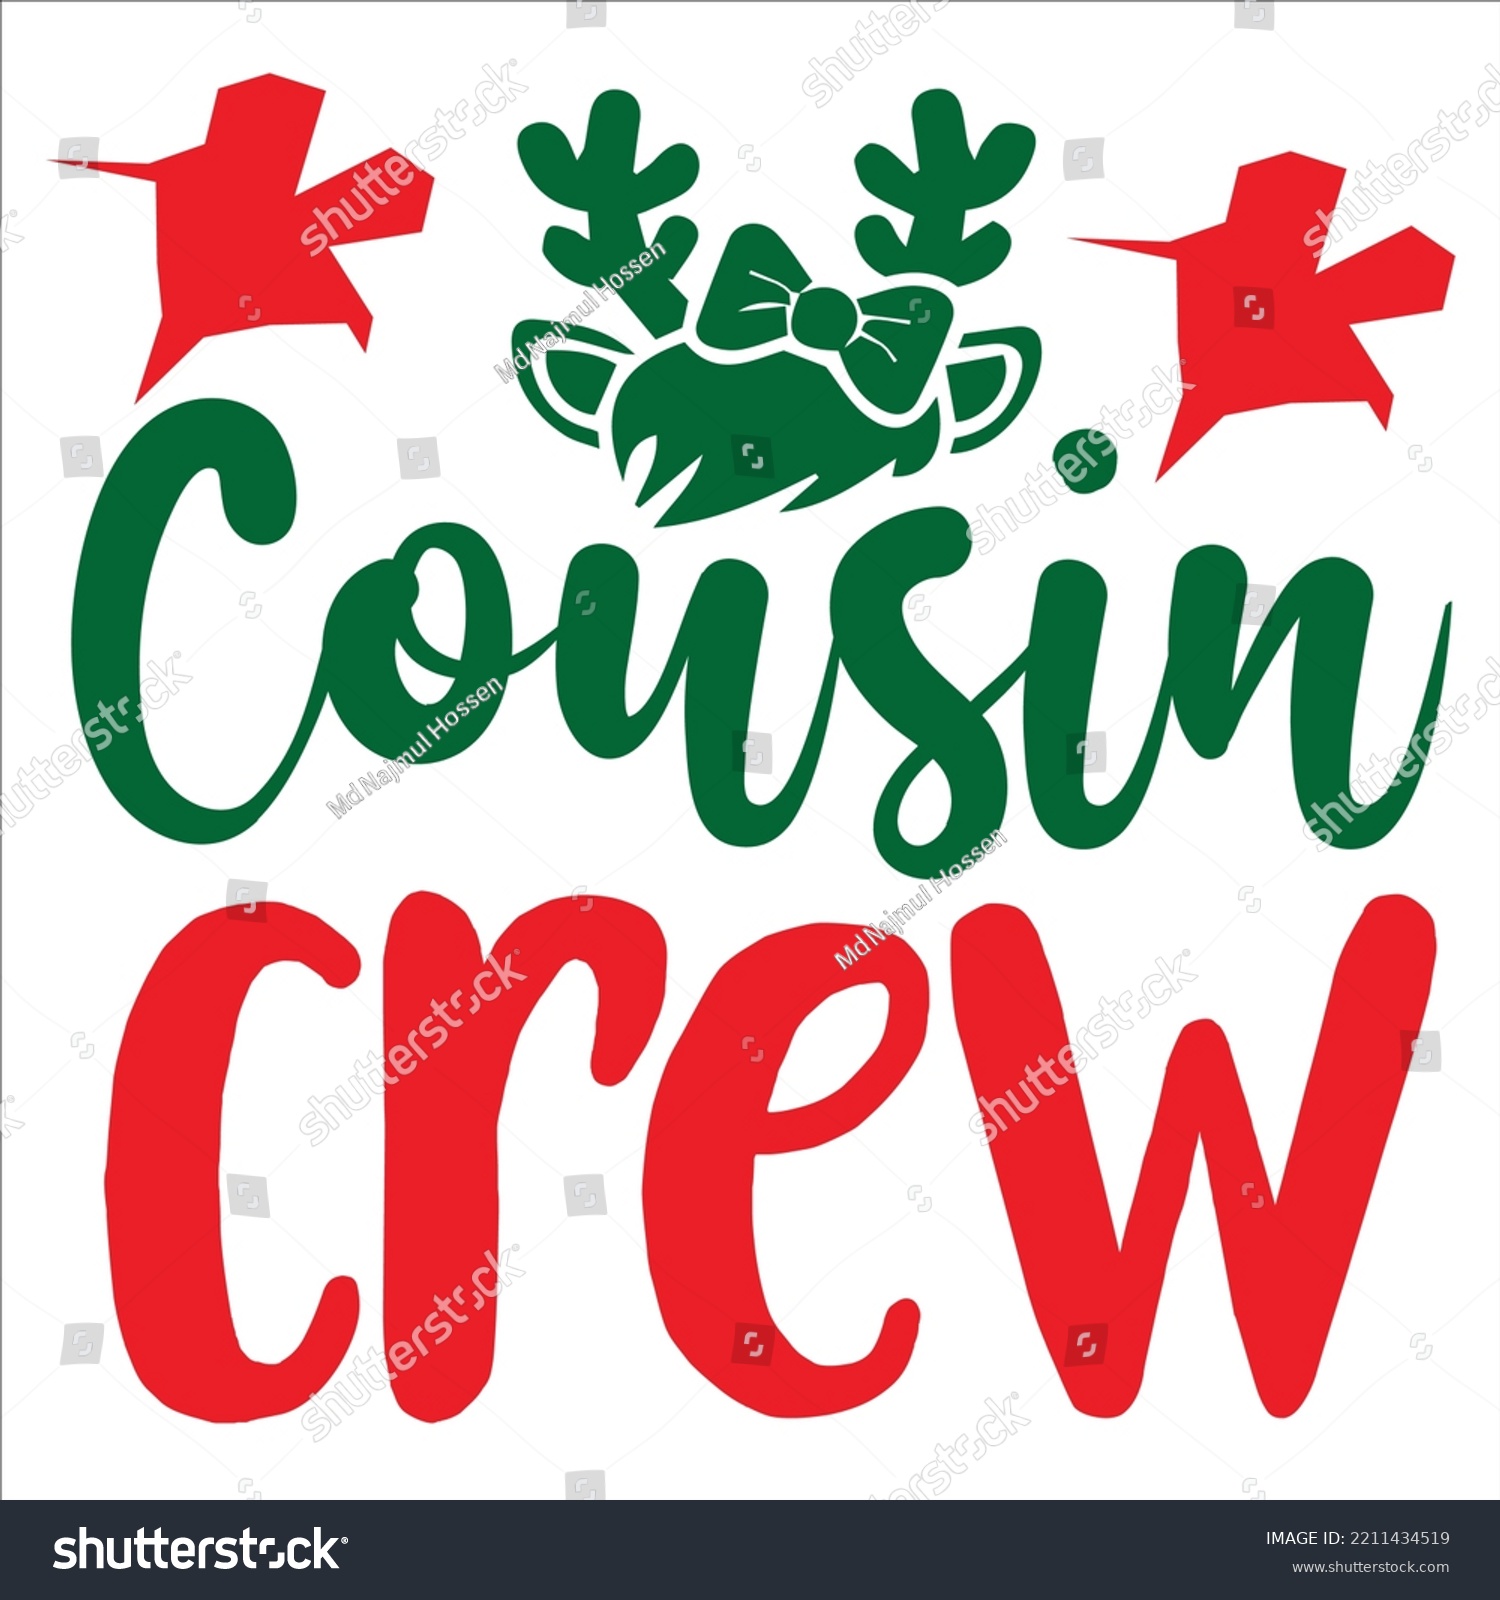 SVG of Cousin Crew, Merry Christmas shirts Print Template, Xmas Ugly Snow Santa Clouse New Year Holiday Candy Santa Hat vector illustration for Christmas hand lettered svg